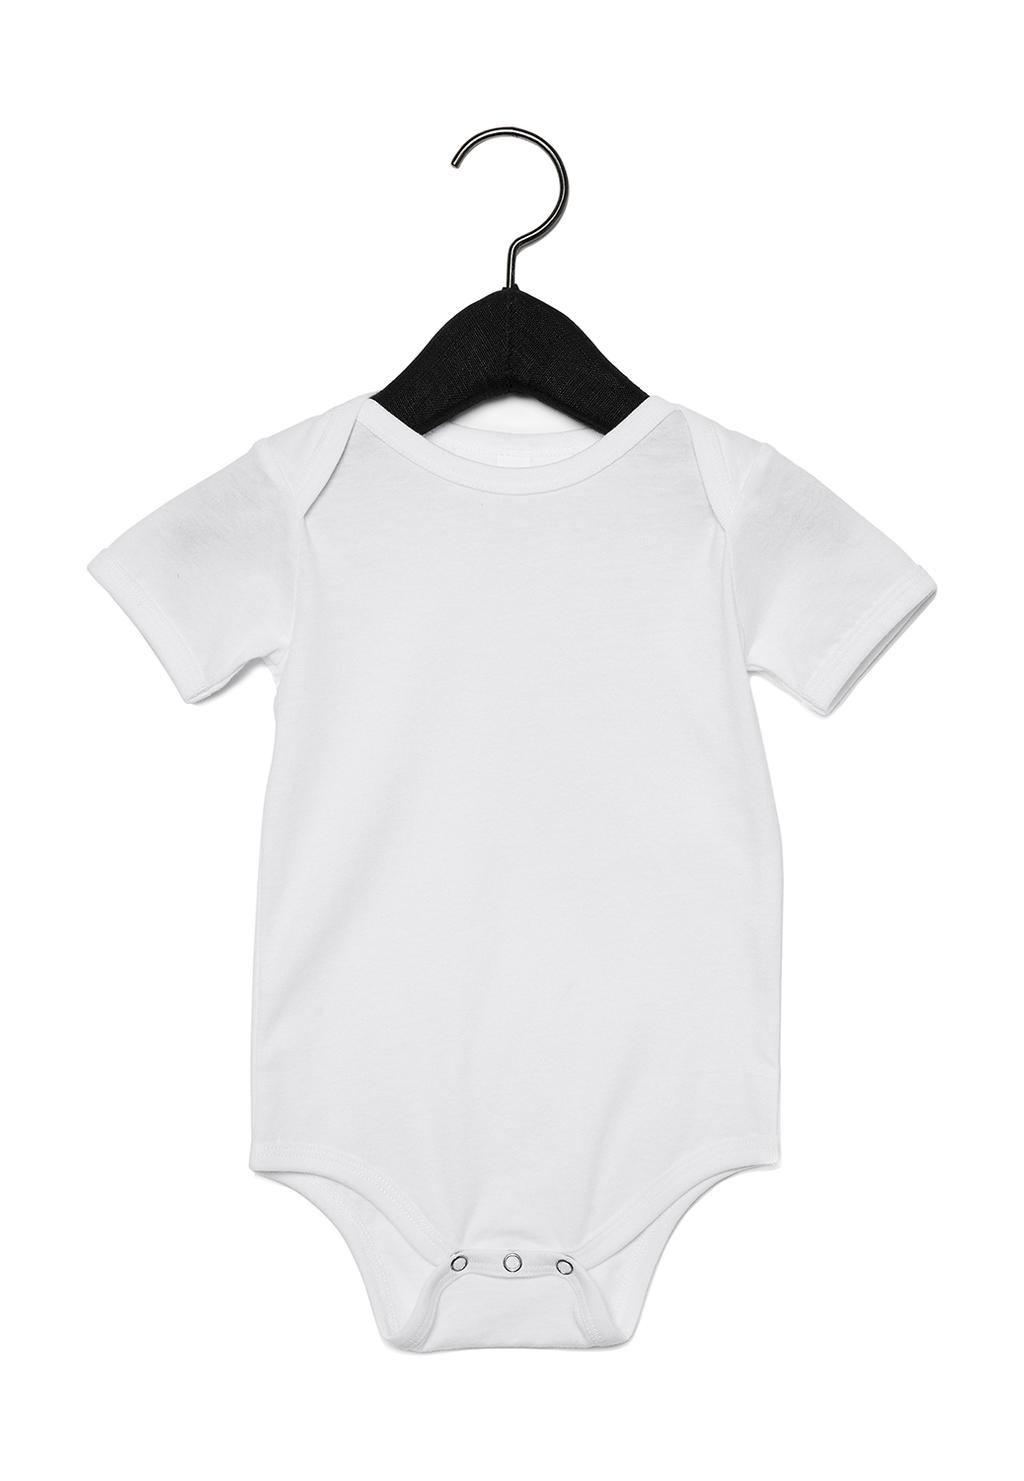  Baby Jersey Short Sleeve One Piece in Farbe White